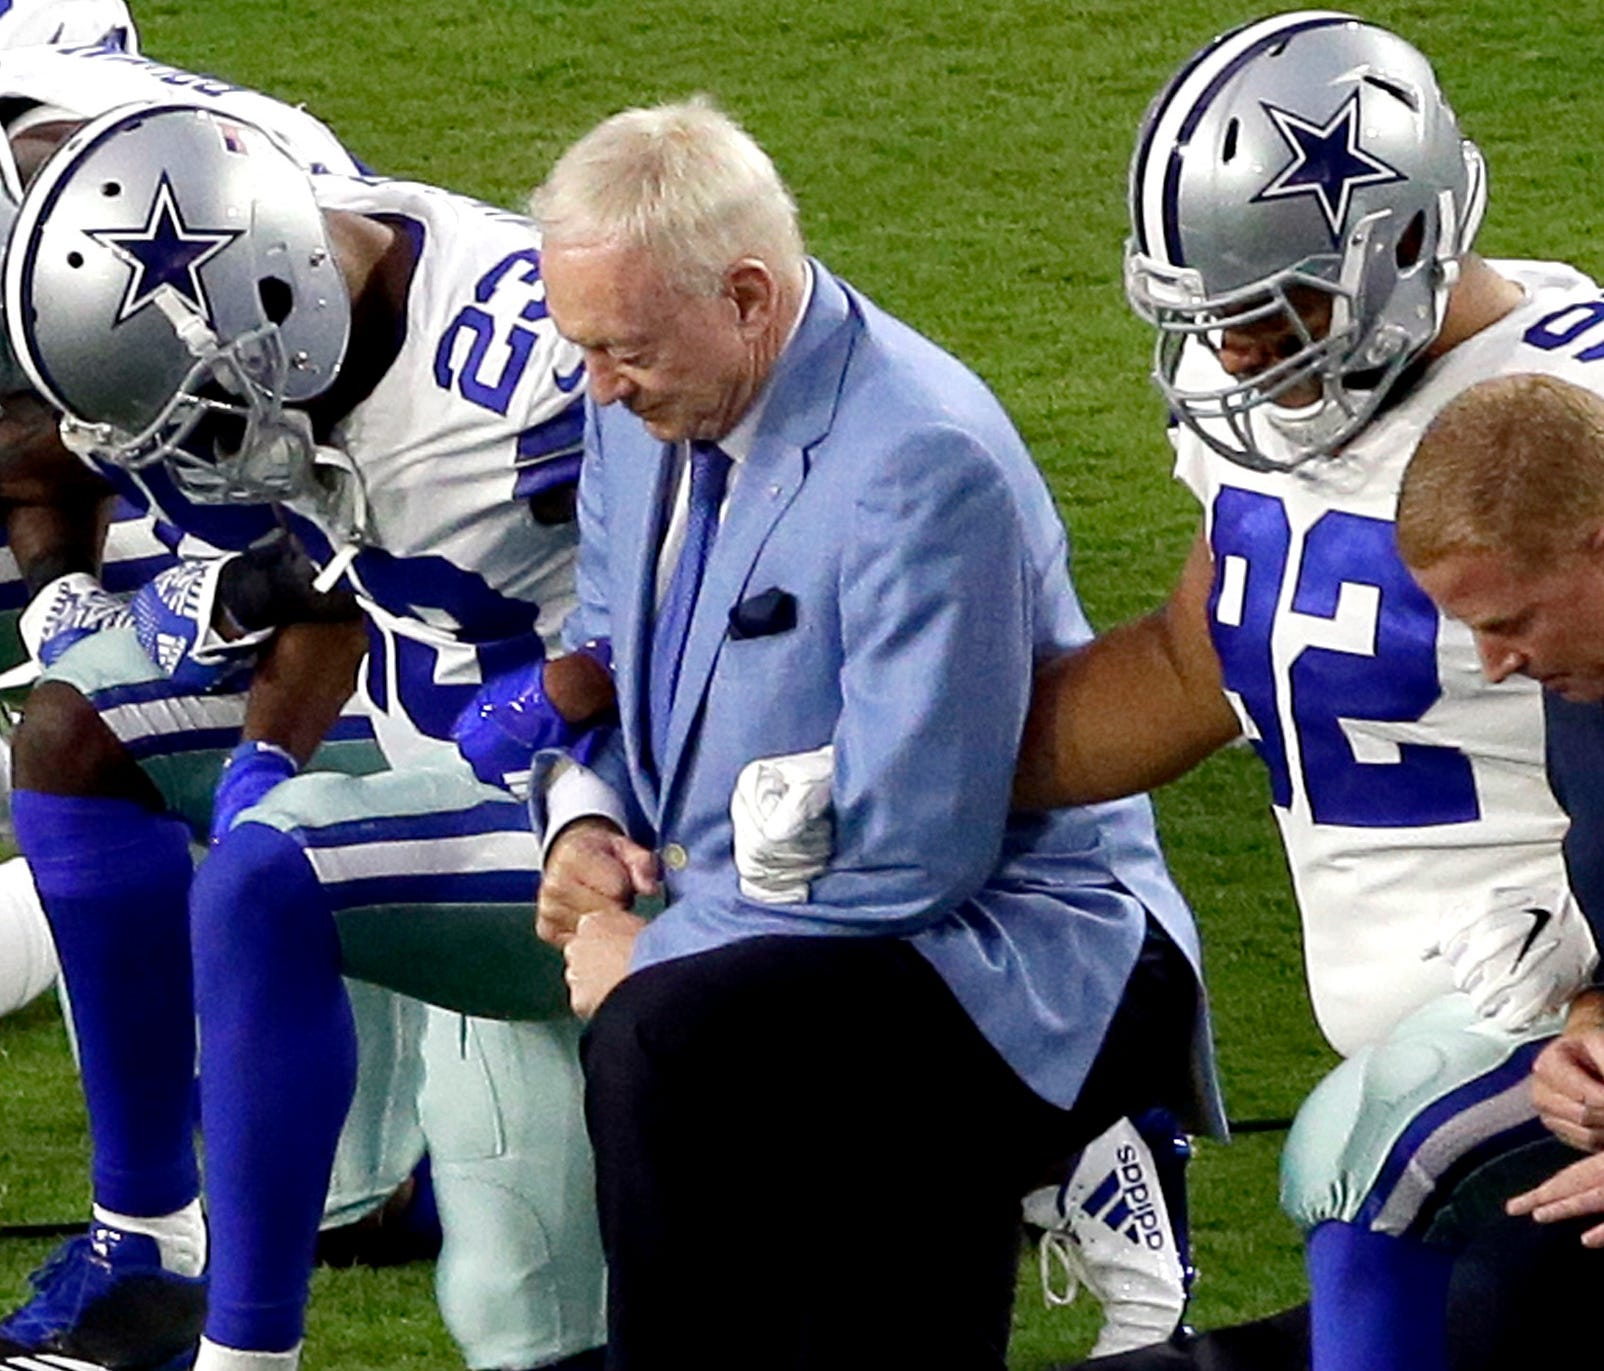 The Dallas Cowboys, led by owner Jerry Jones, take a knee prior to the national anthem.